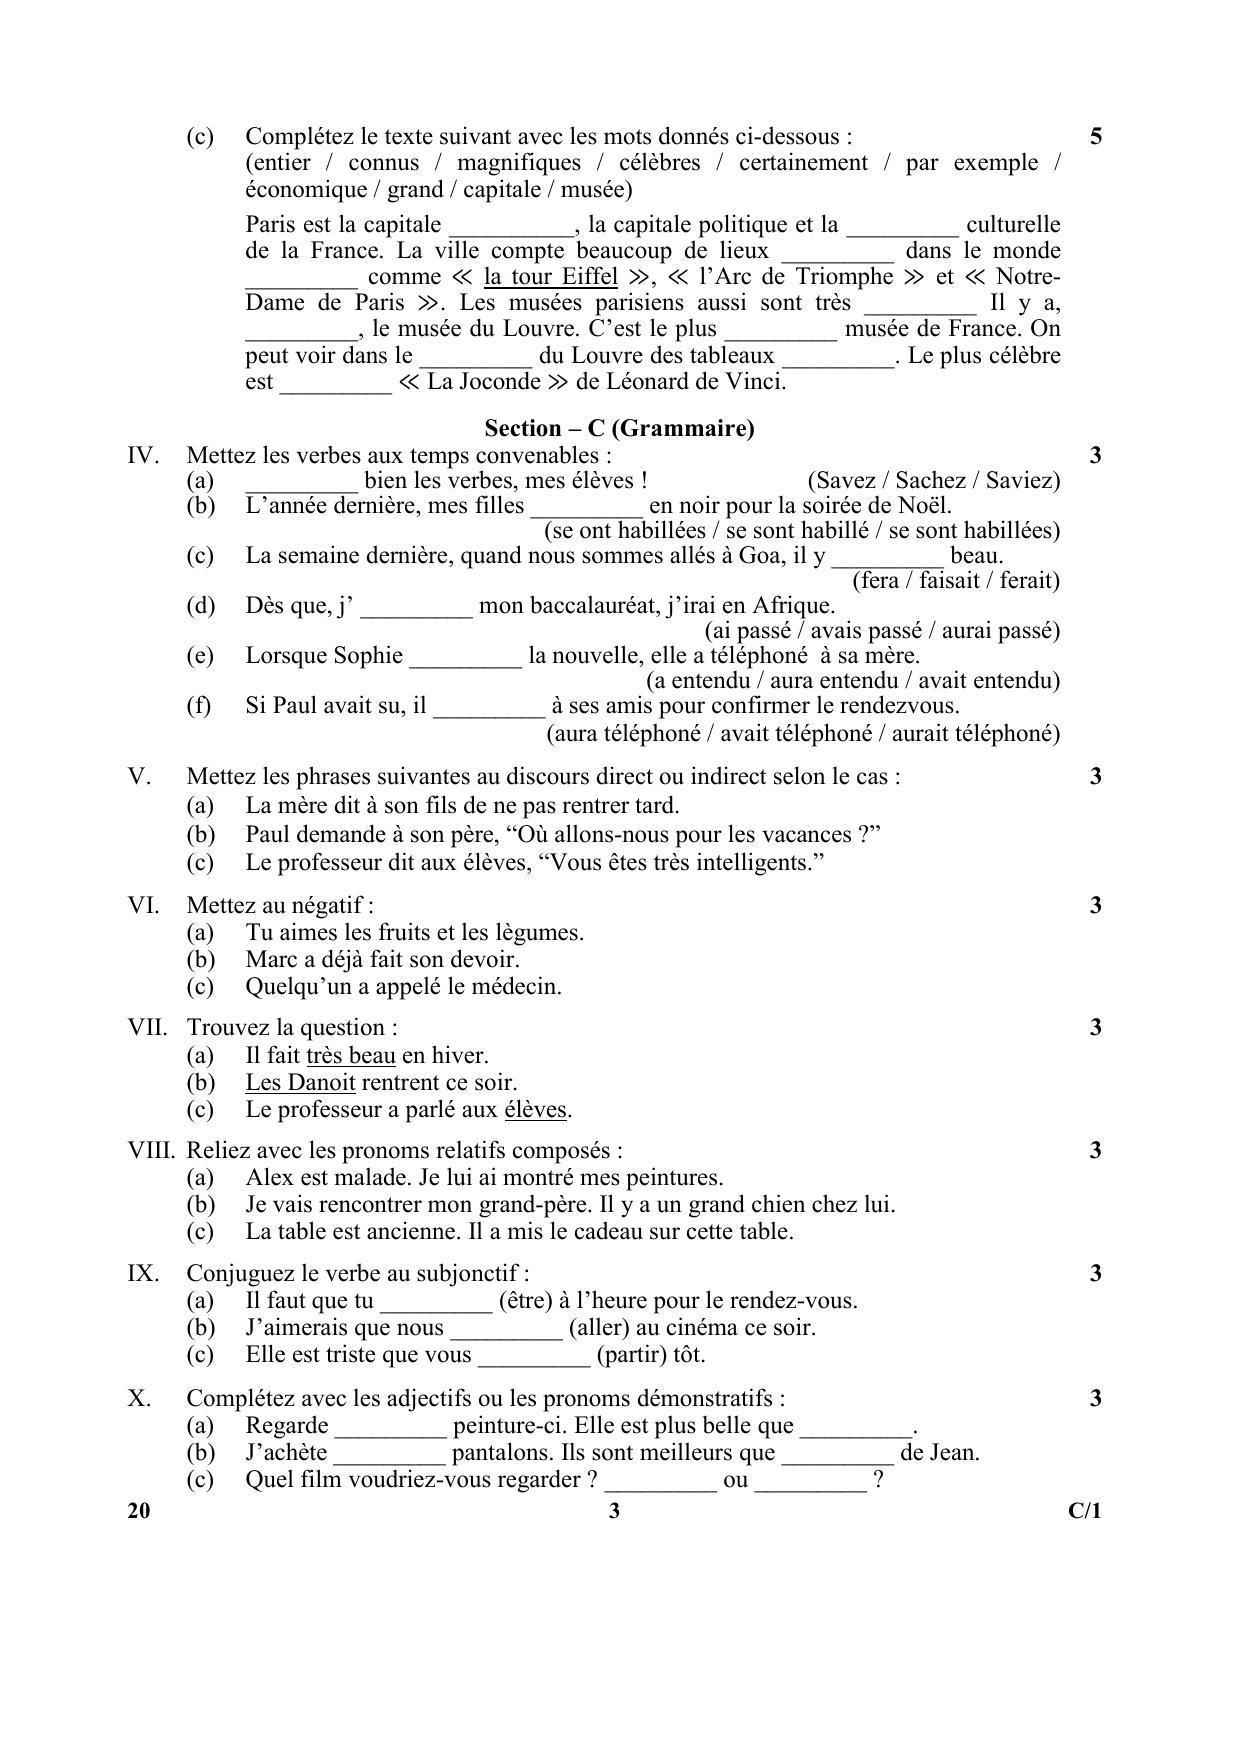 CBSE Class 10 20 (French) 2018 Compartment Question Paper - Page 3